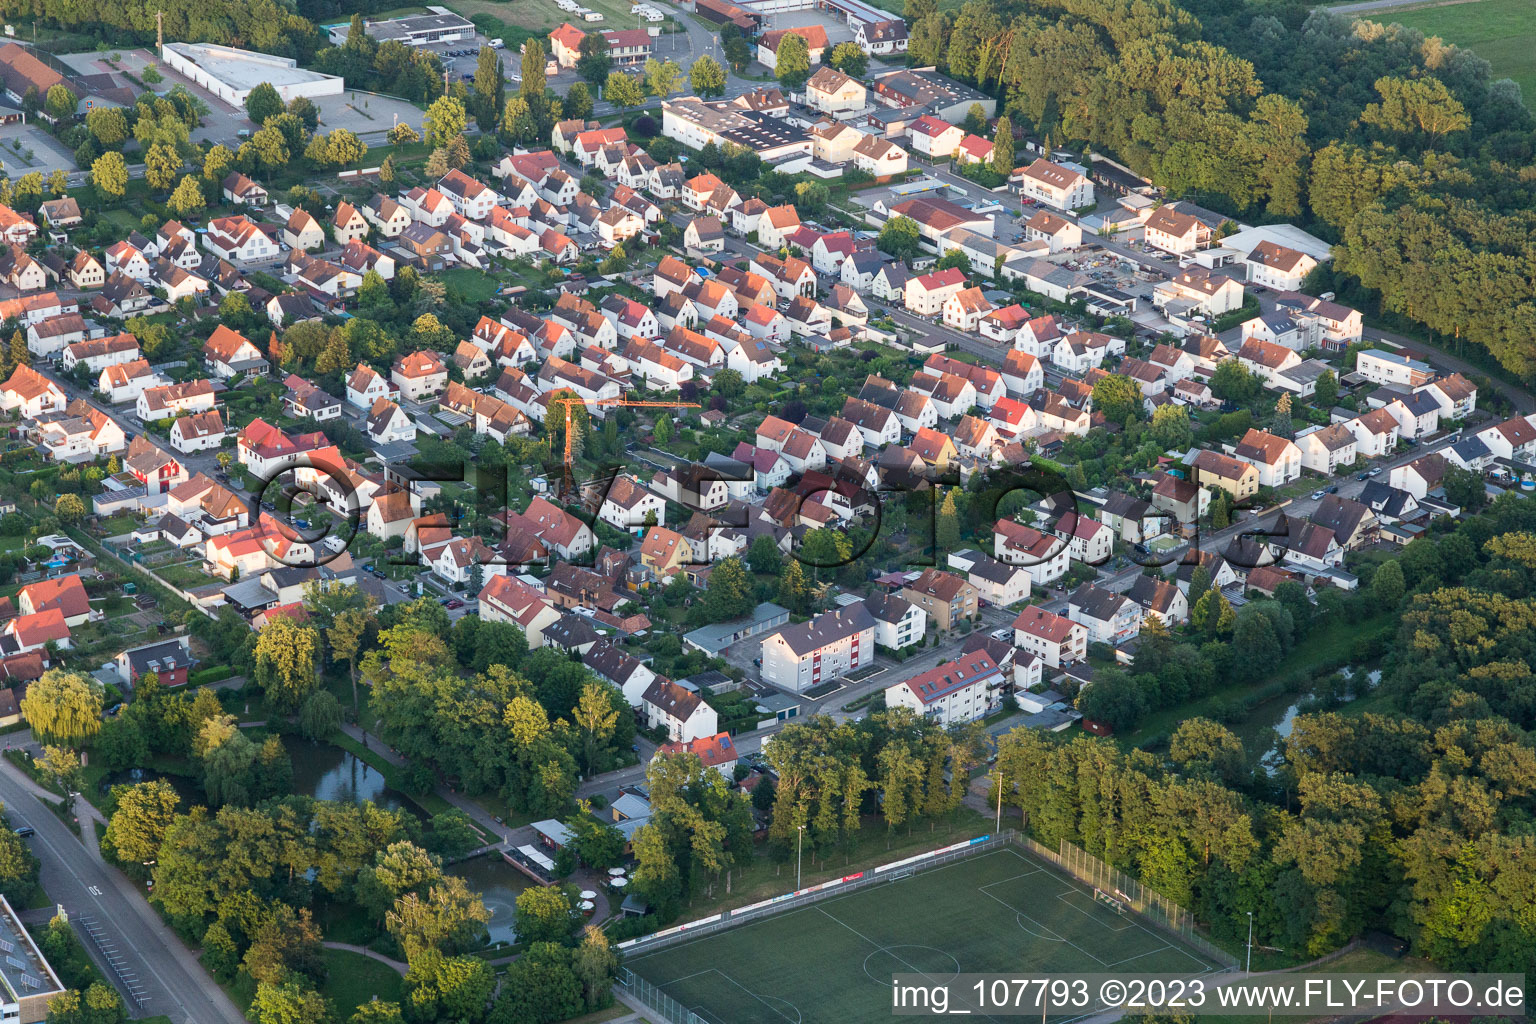 Drone image of Settlement in Kandel in the state Rhineland-Palatinate, Germany